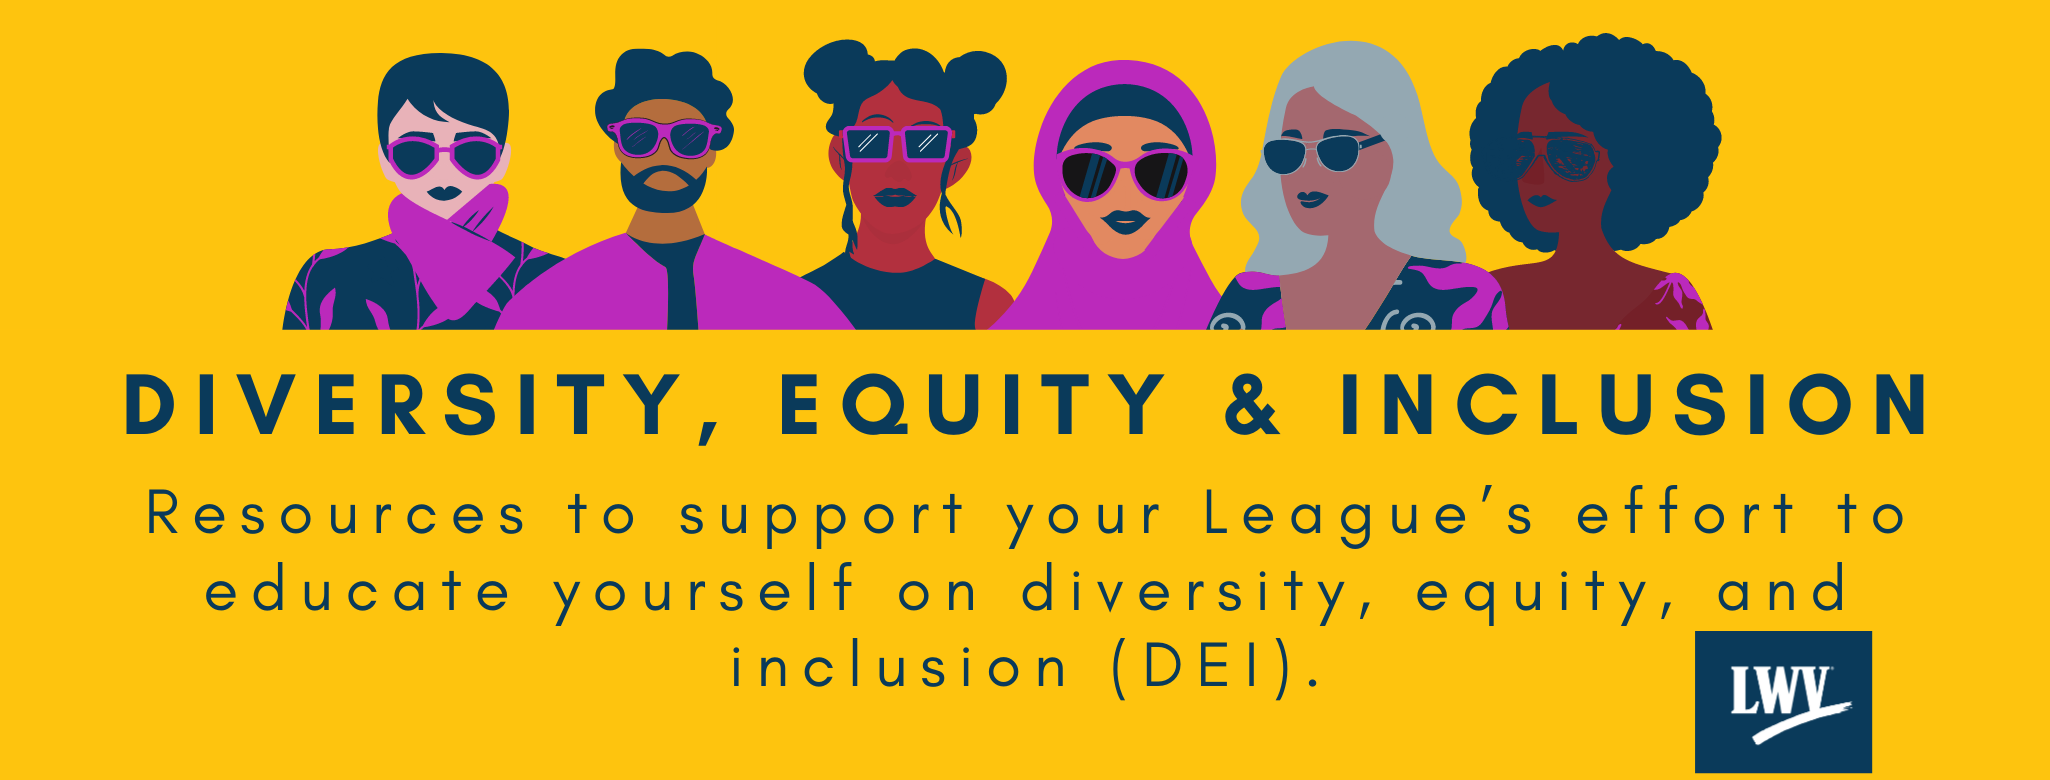 Diversity, Equity and Inclusion Resources 